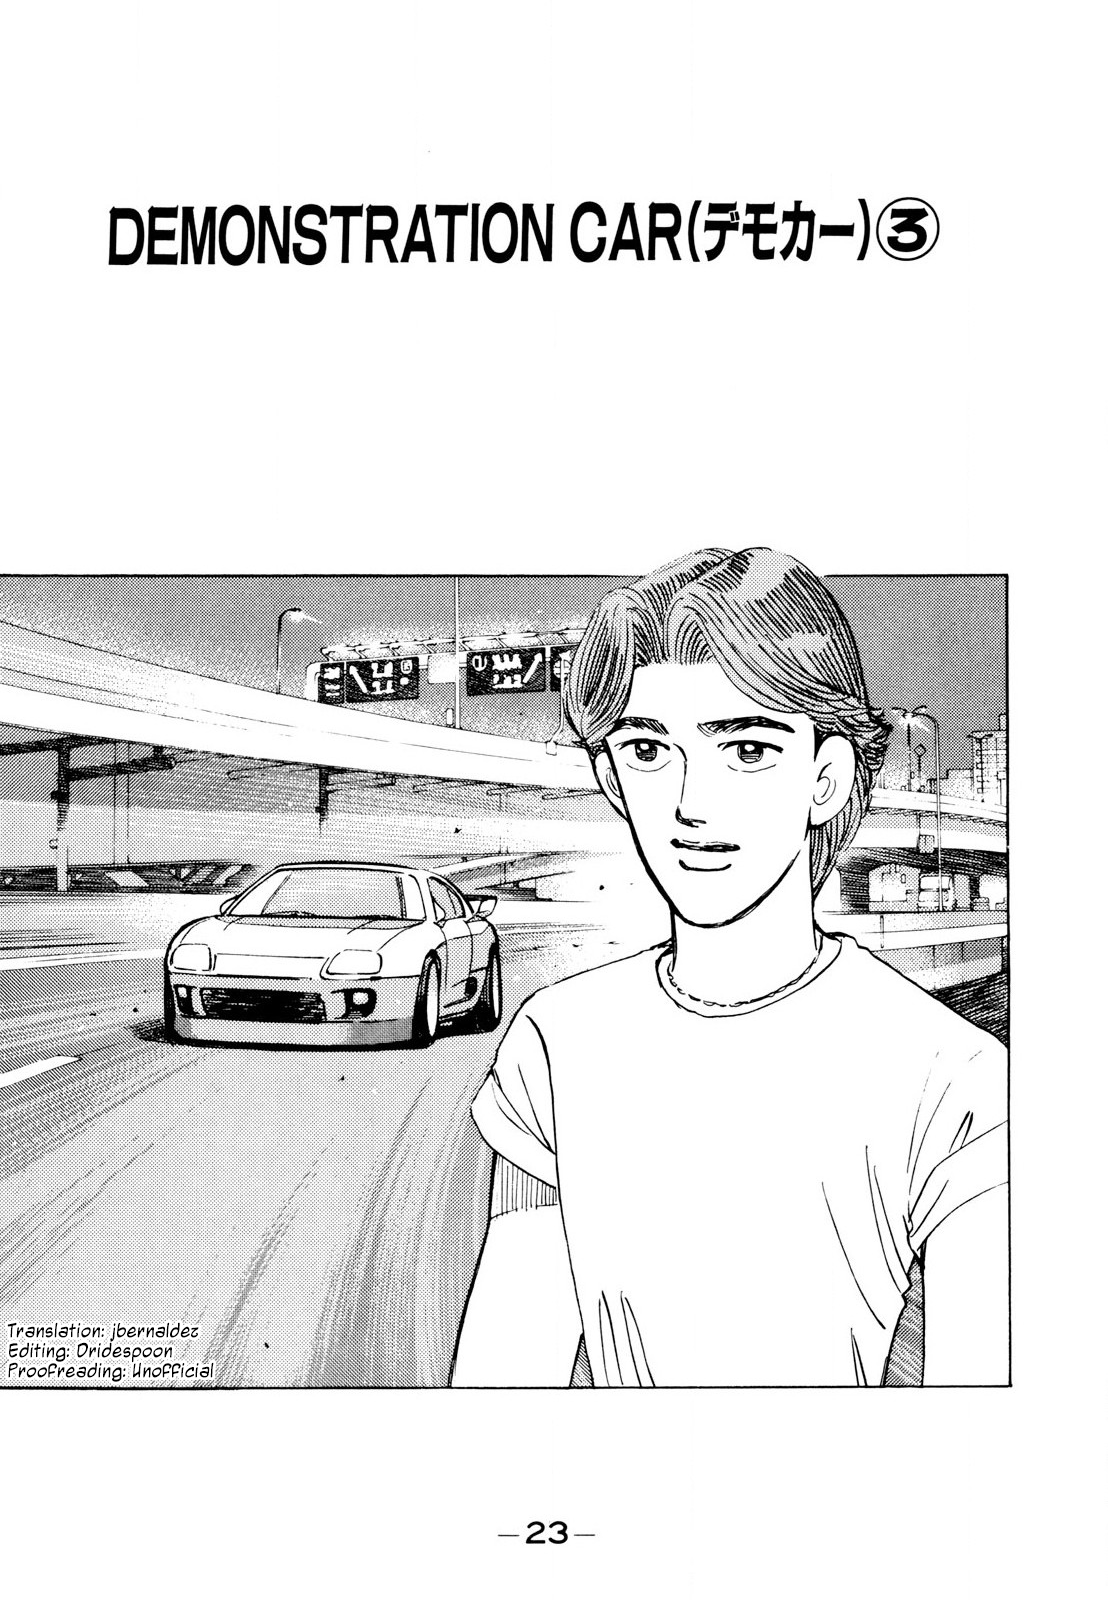 Wangan Midnight Vol.10 Chapter 106: Demonstration Car ③ - Picture 1